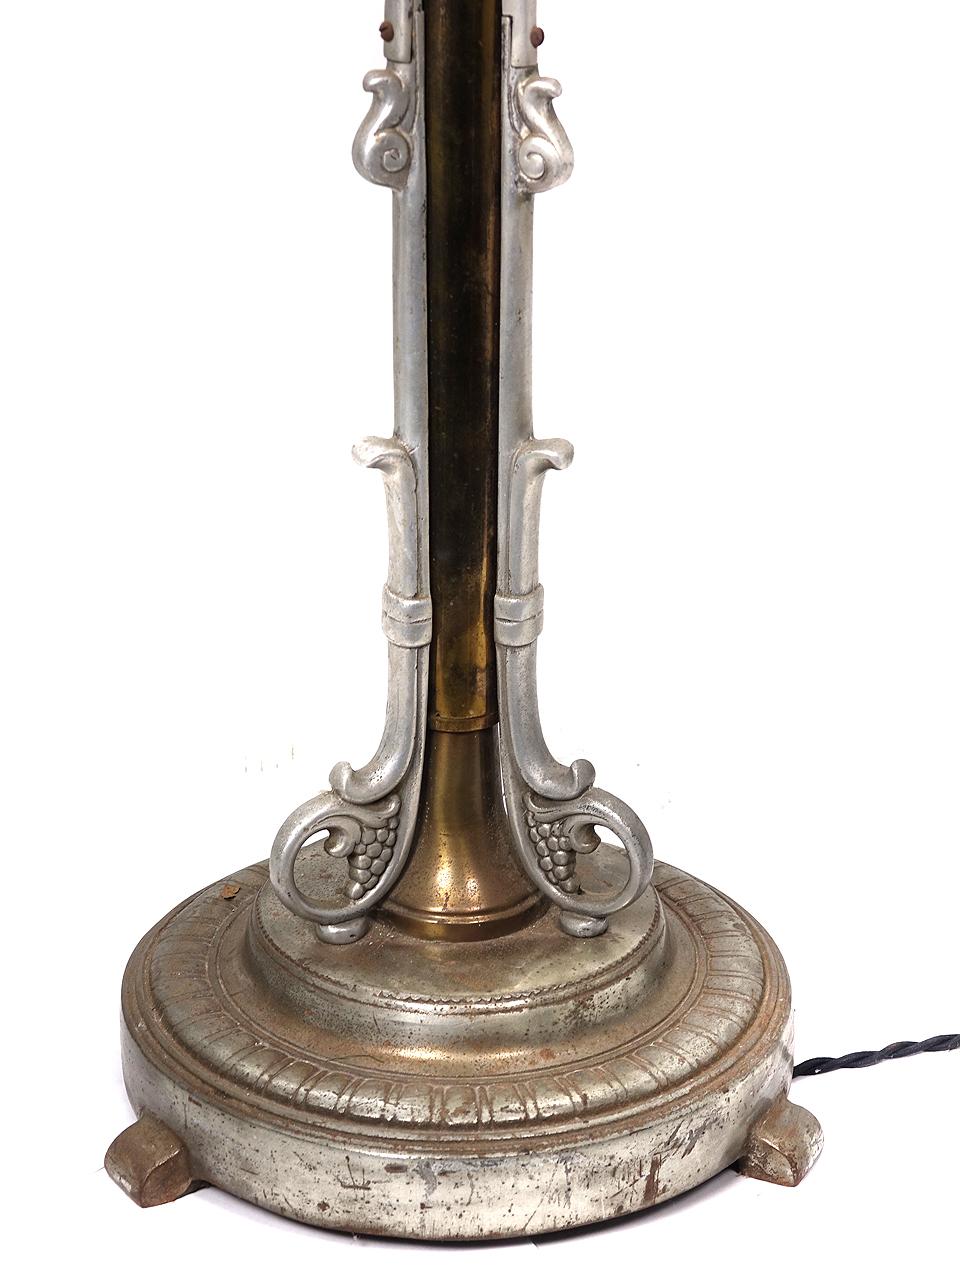 This is a nice and very Art Deco floor lamp. It’s a combination of aluminum and brass with a milk glass shade. The lamp is unique because it telescopes up and down for reading. It is newly wired including a fresh toggle switch.